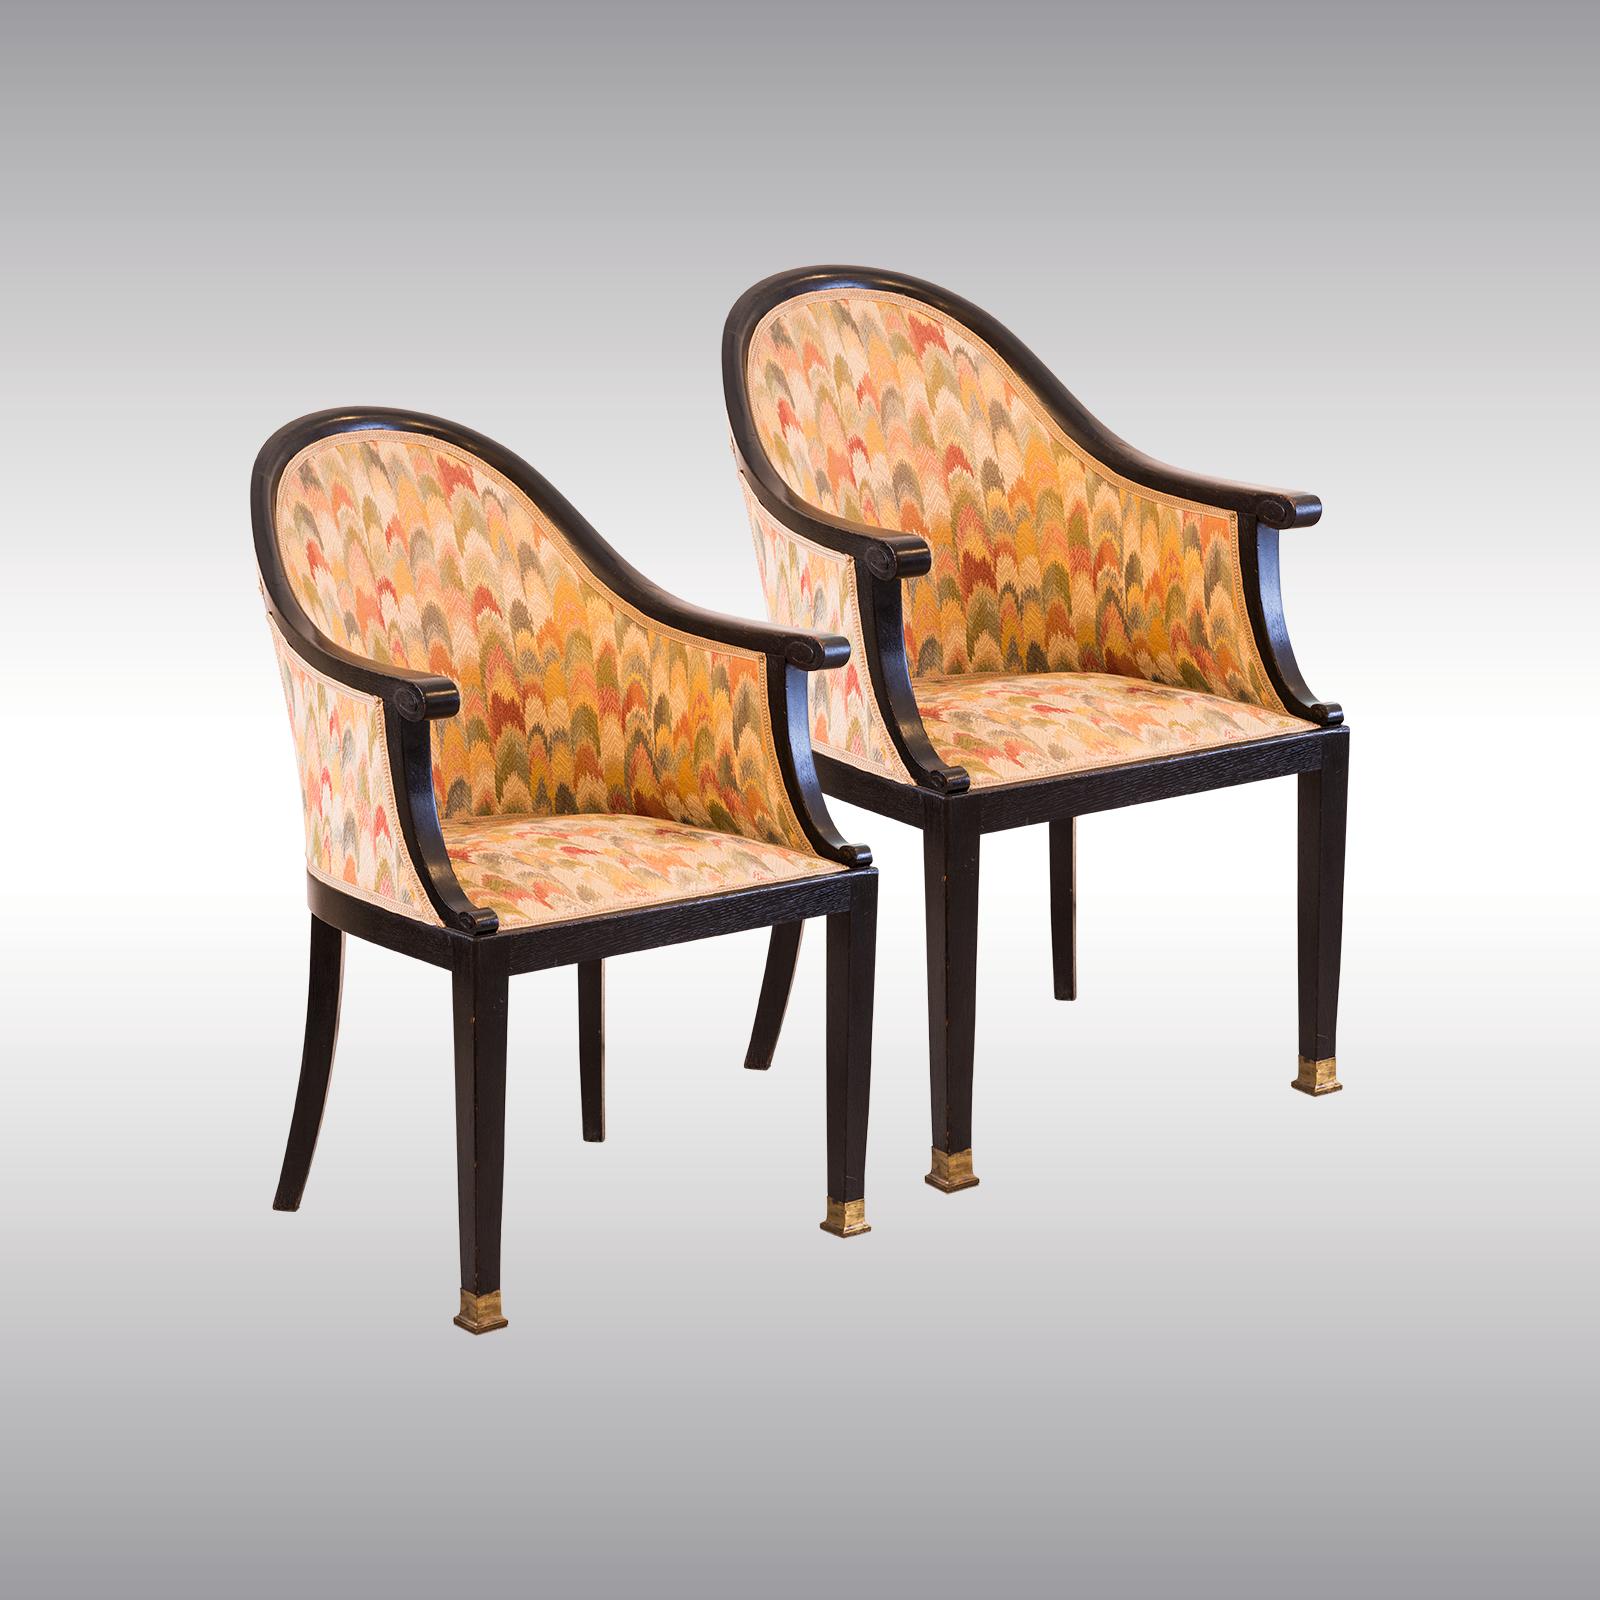 Very elegant and comfortable chairs attributed to Josef Hoffmann or Otto Prutscher. Has been rennovated over a while, the fabric is partly stained. Can be sold separately.

